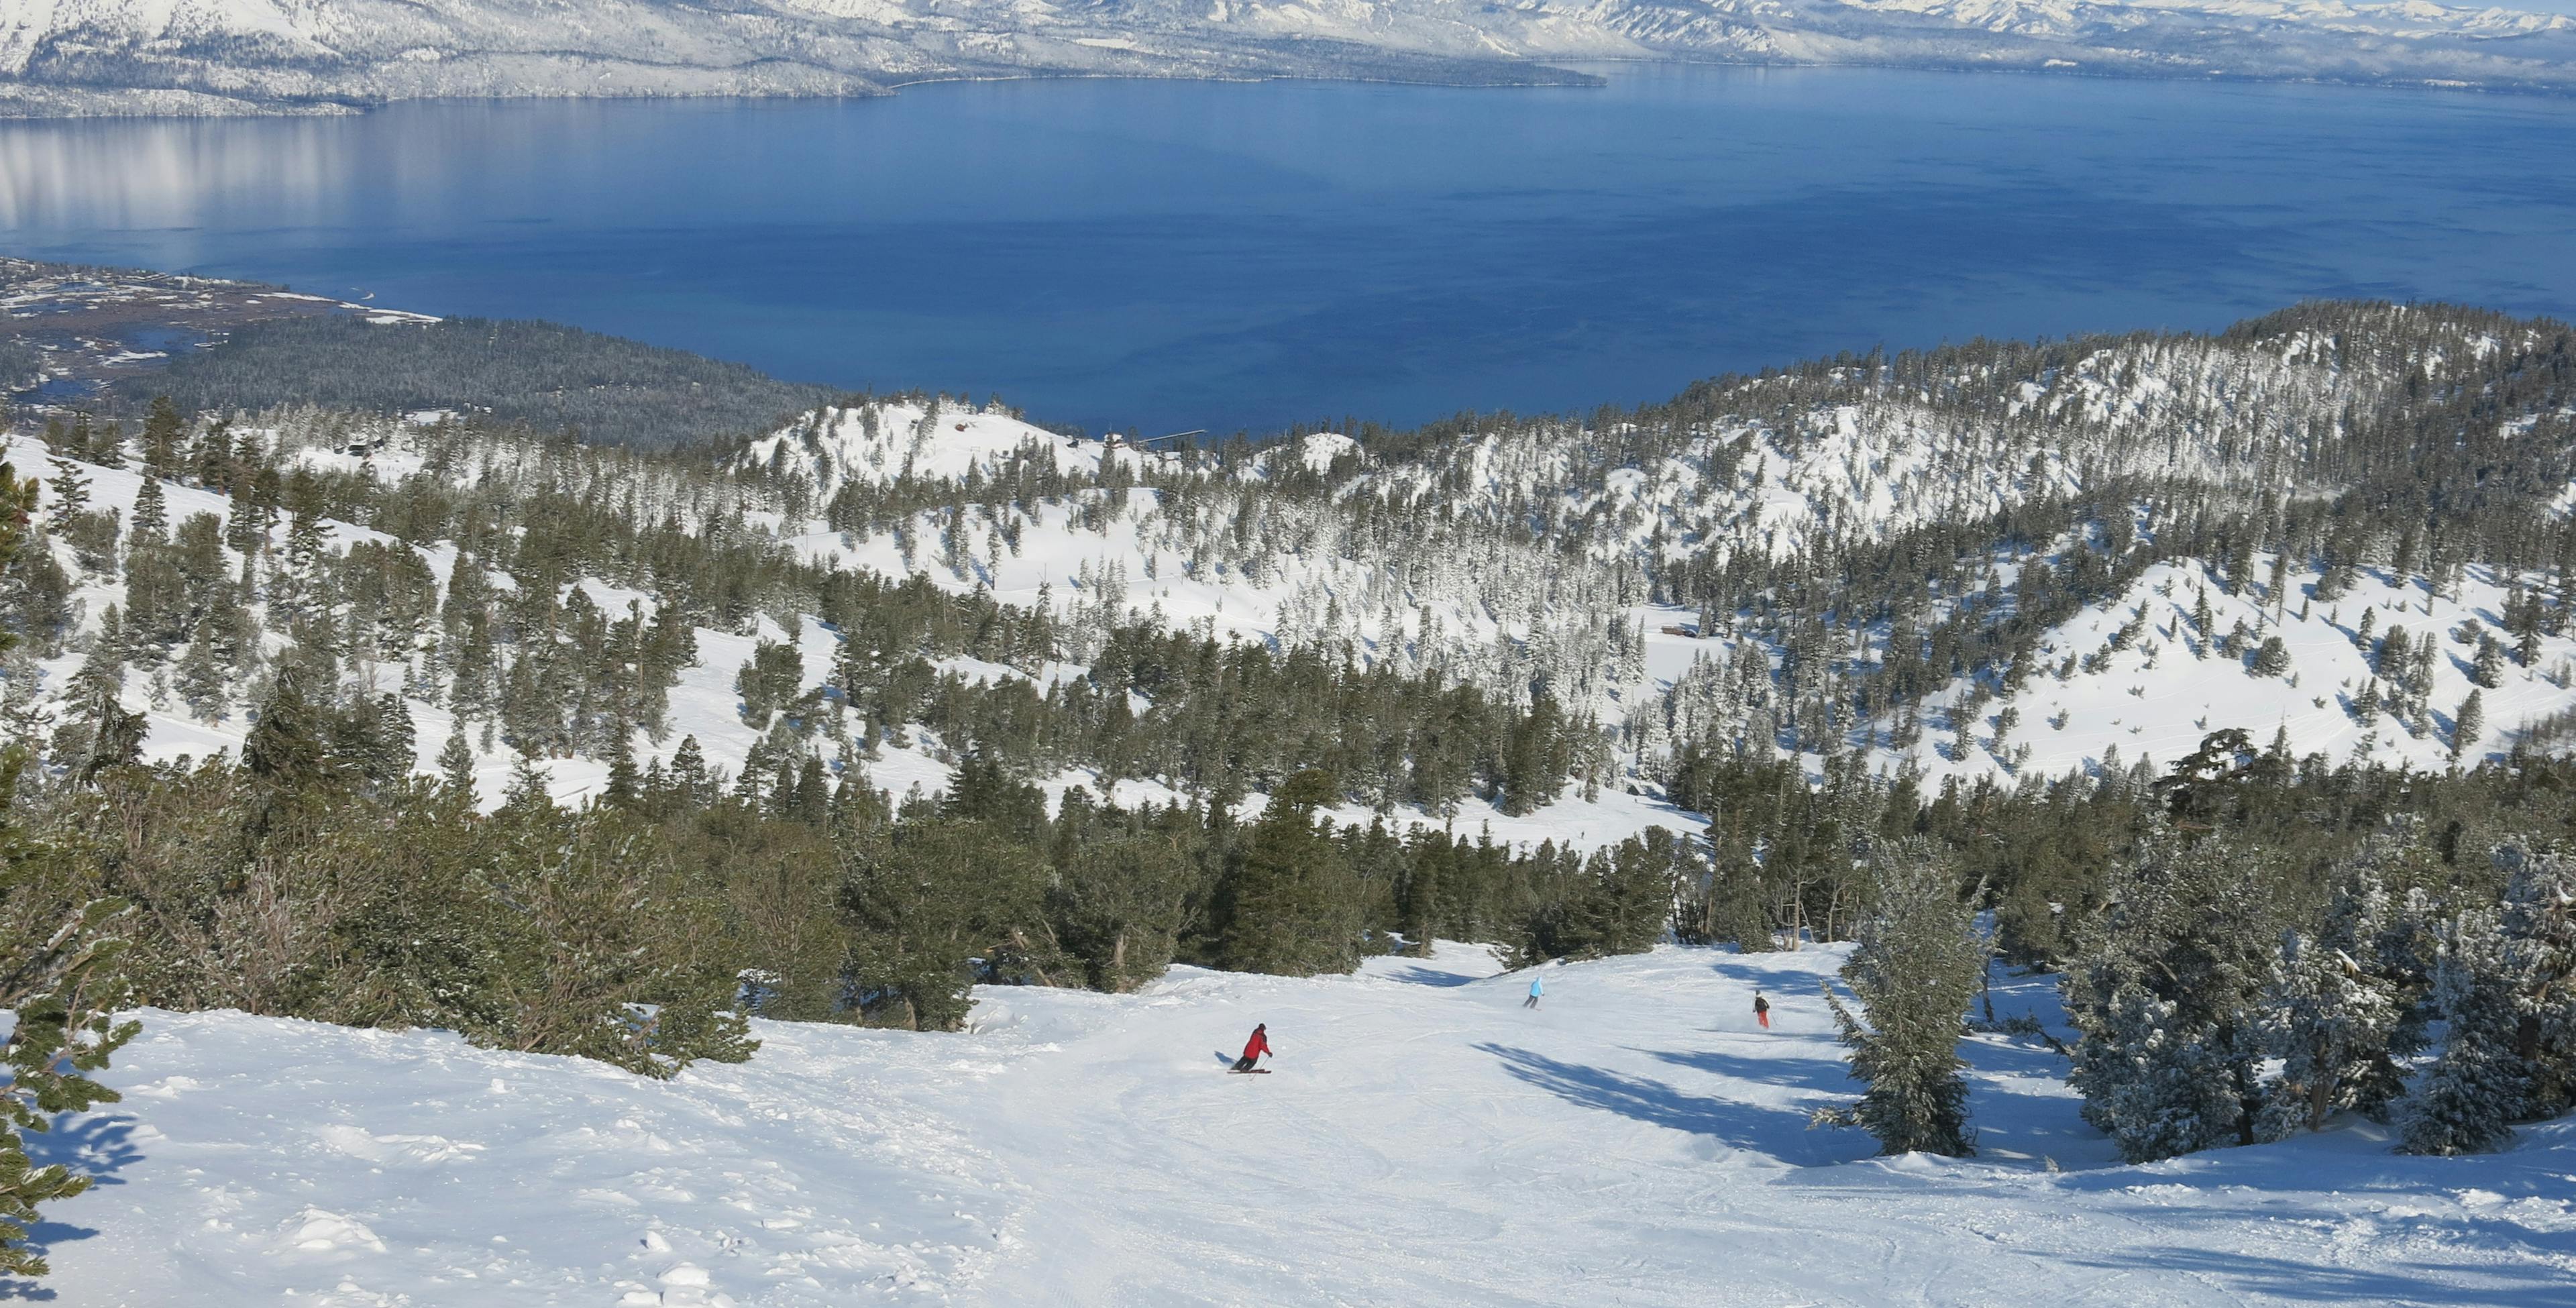 Heavenly ski slope with a view of Lake Tahoe